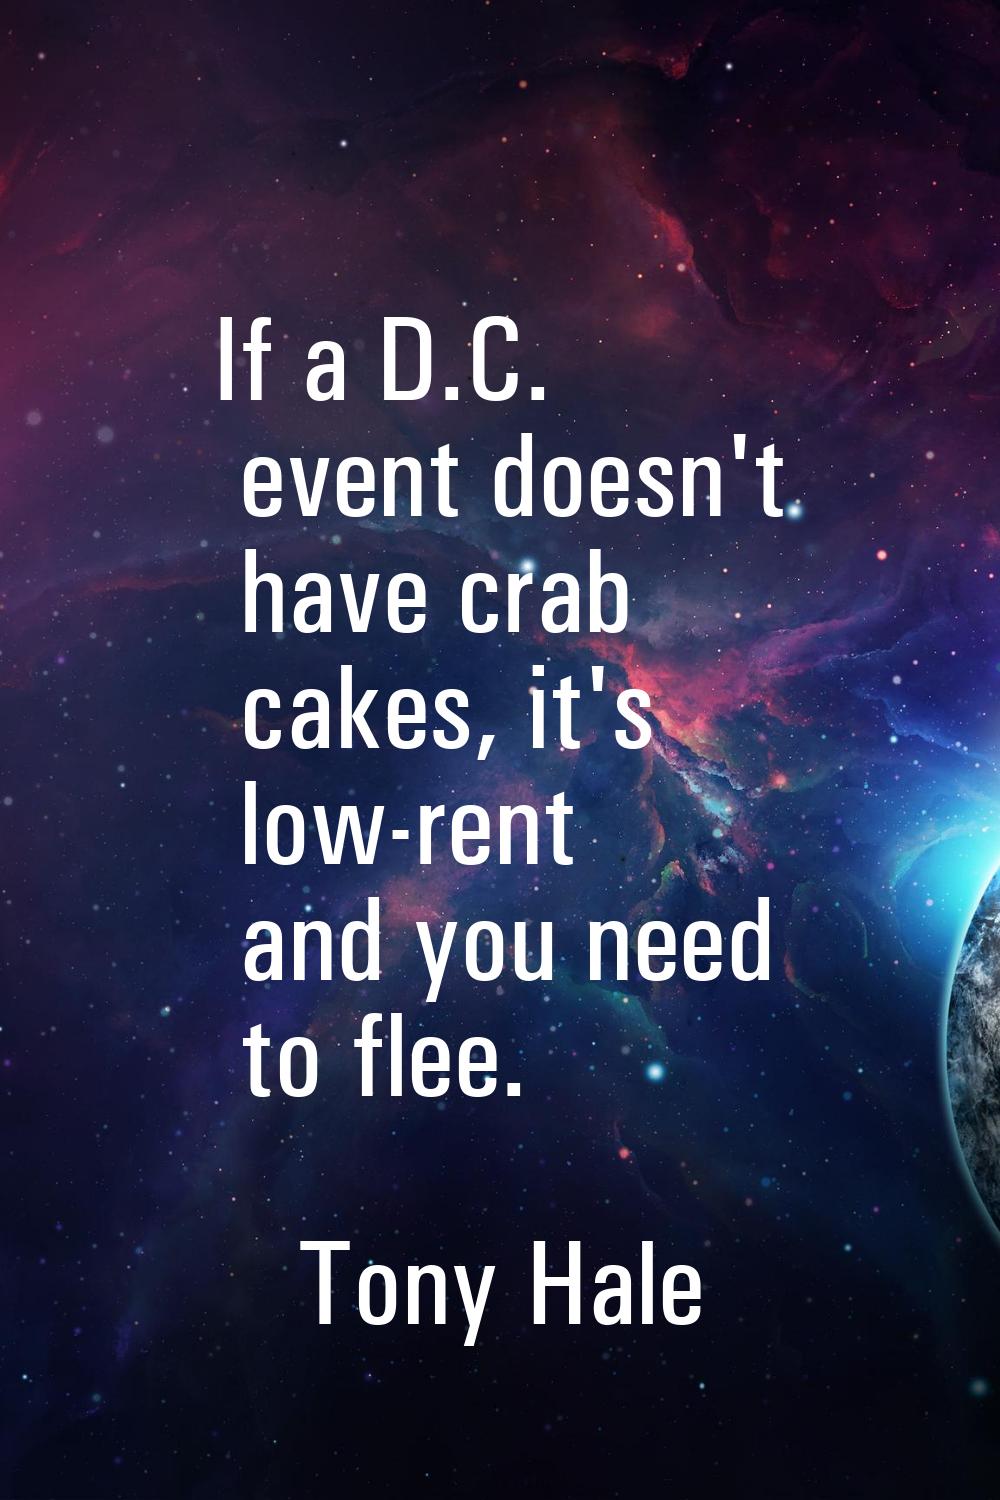 If a D.C. event doesn't have crab cakes, it's low-rent and you need to flee.